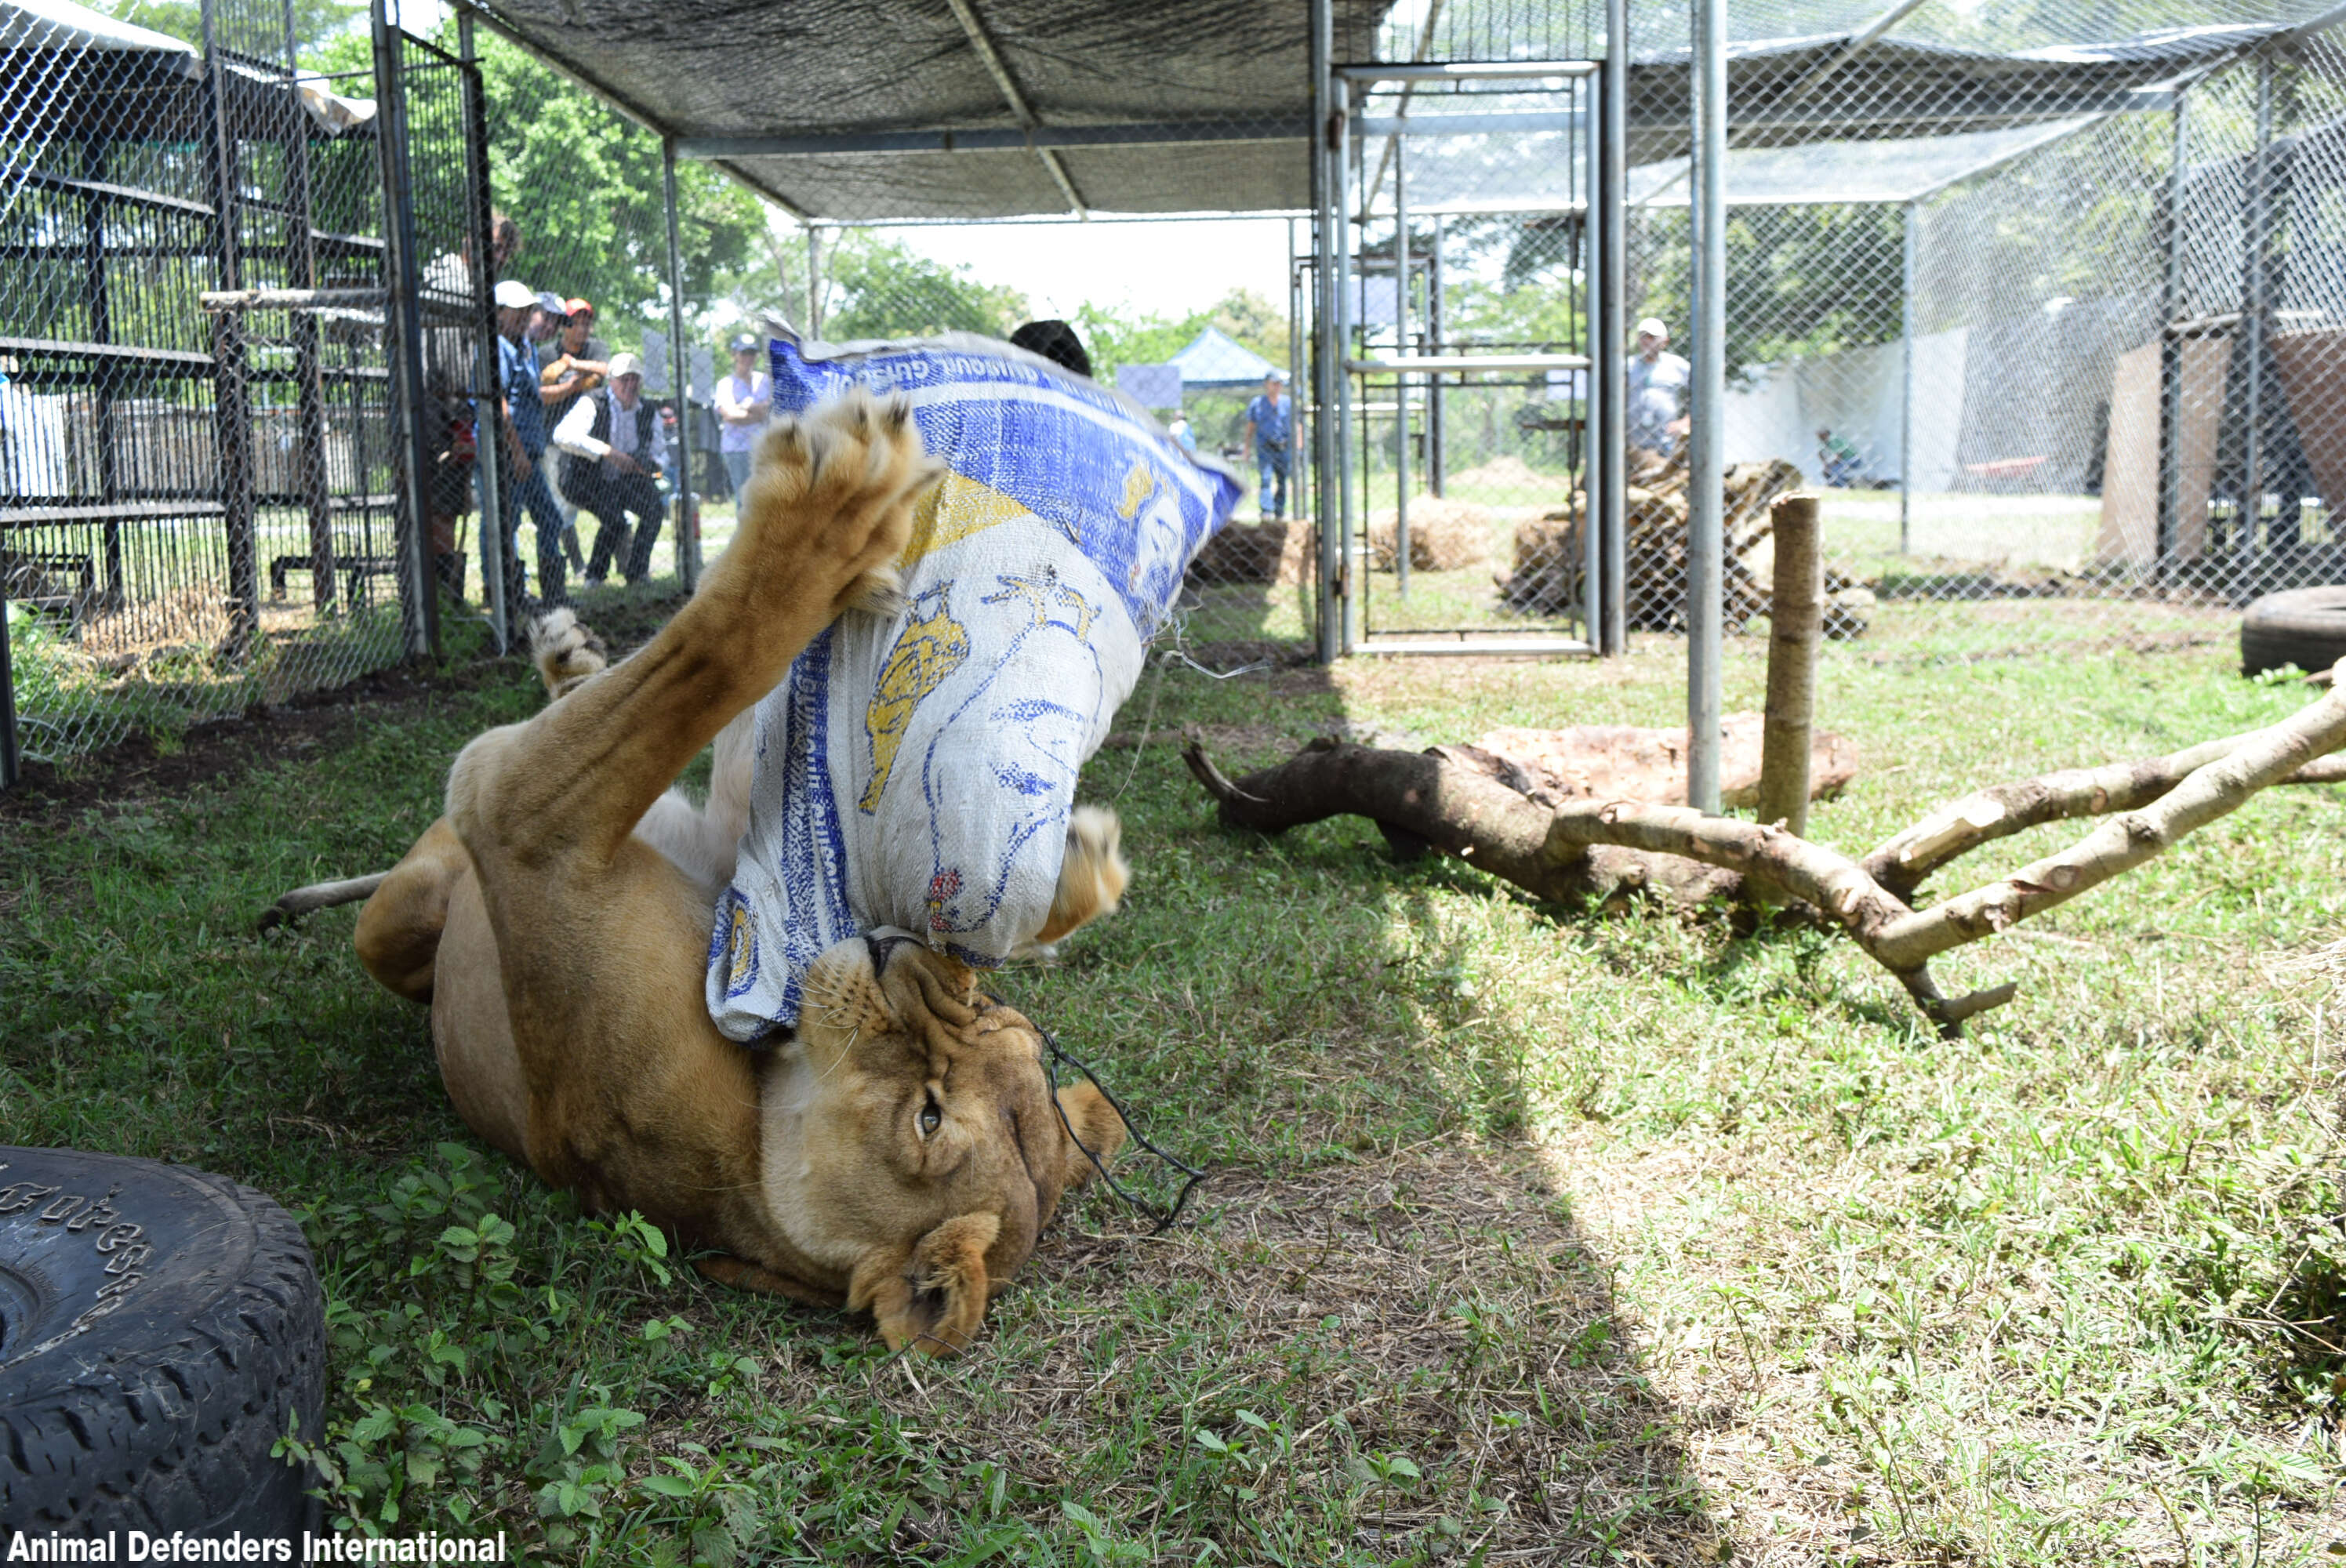 Lion playing with toy in new enclosure